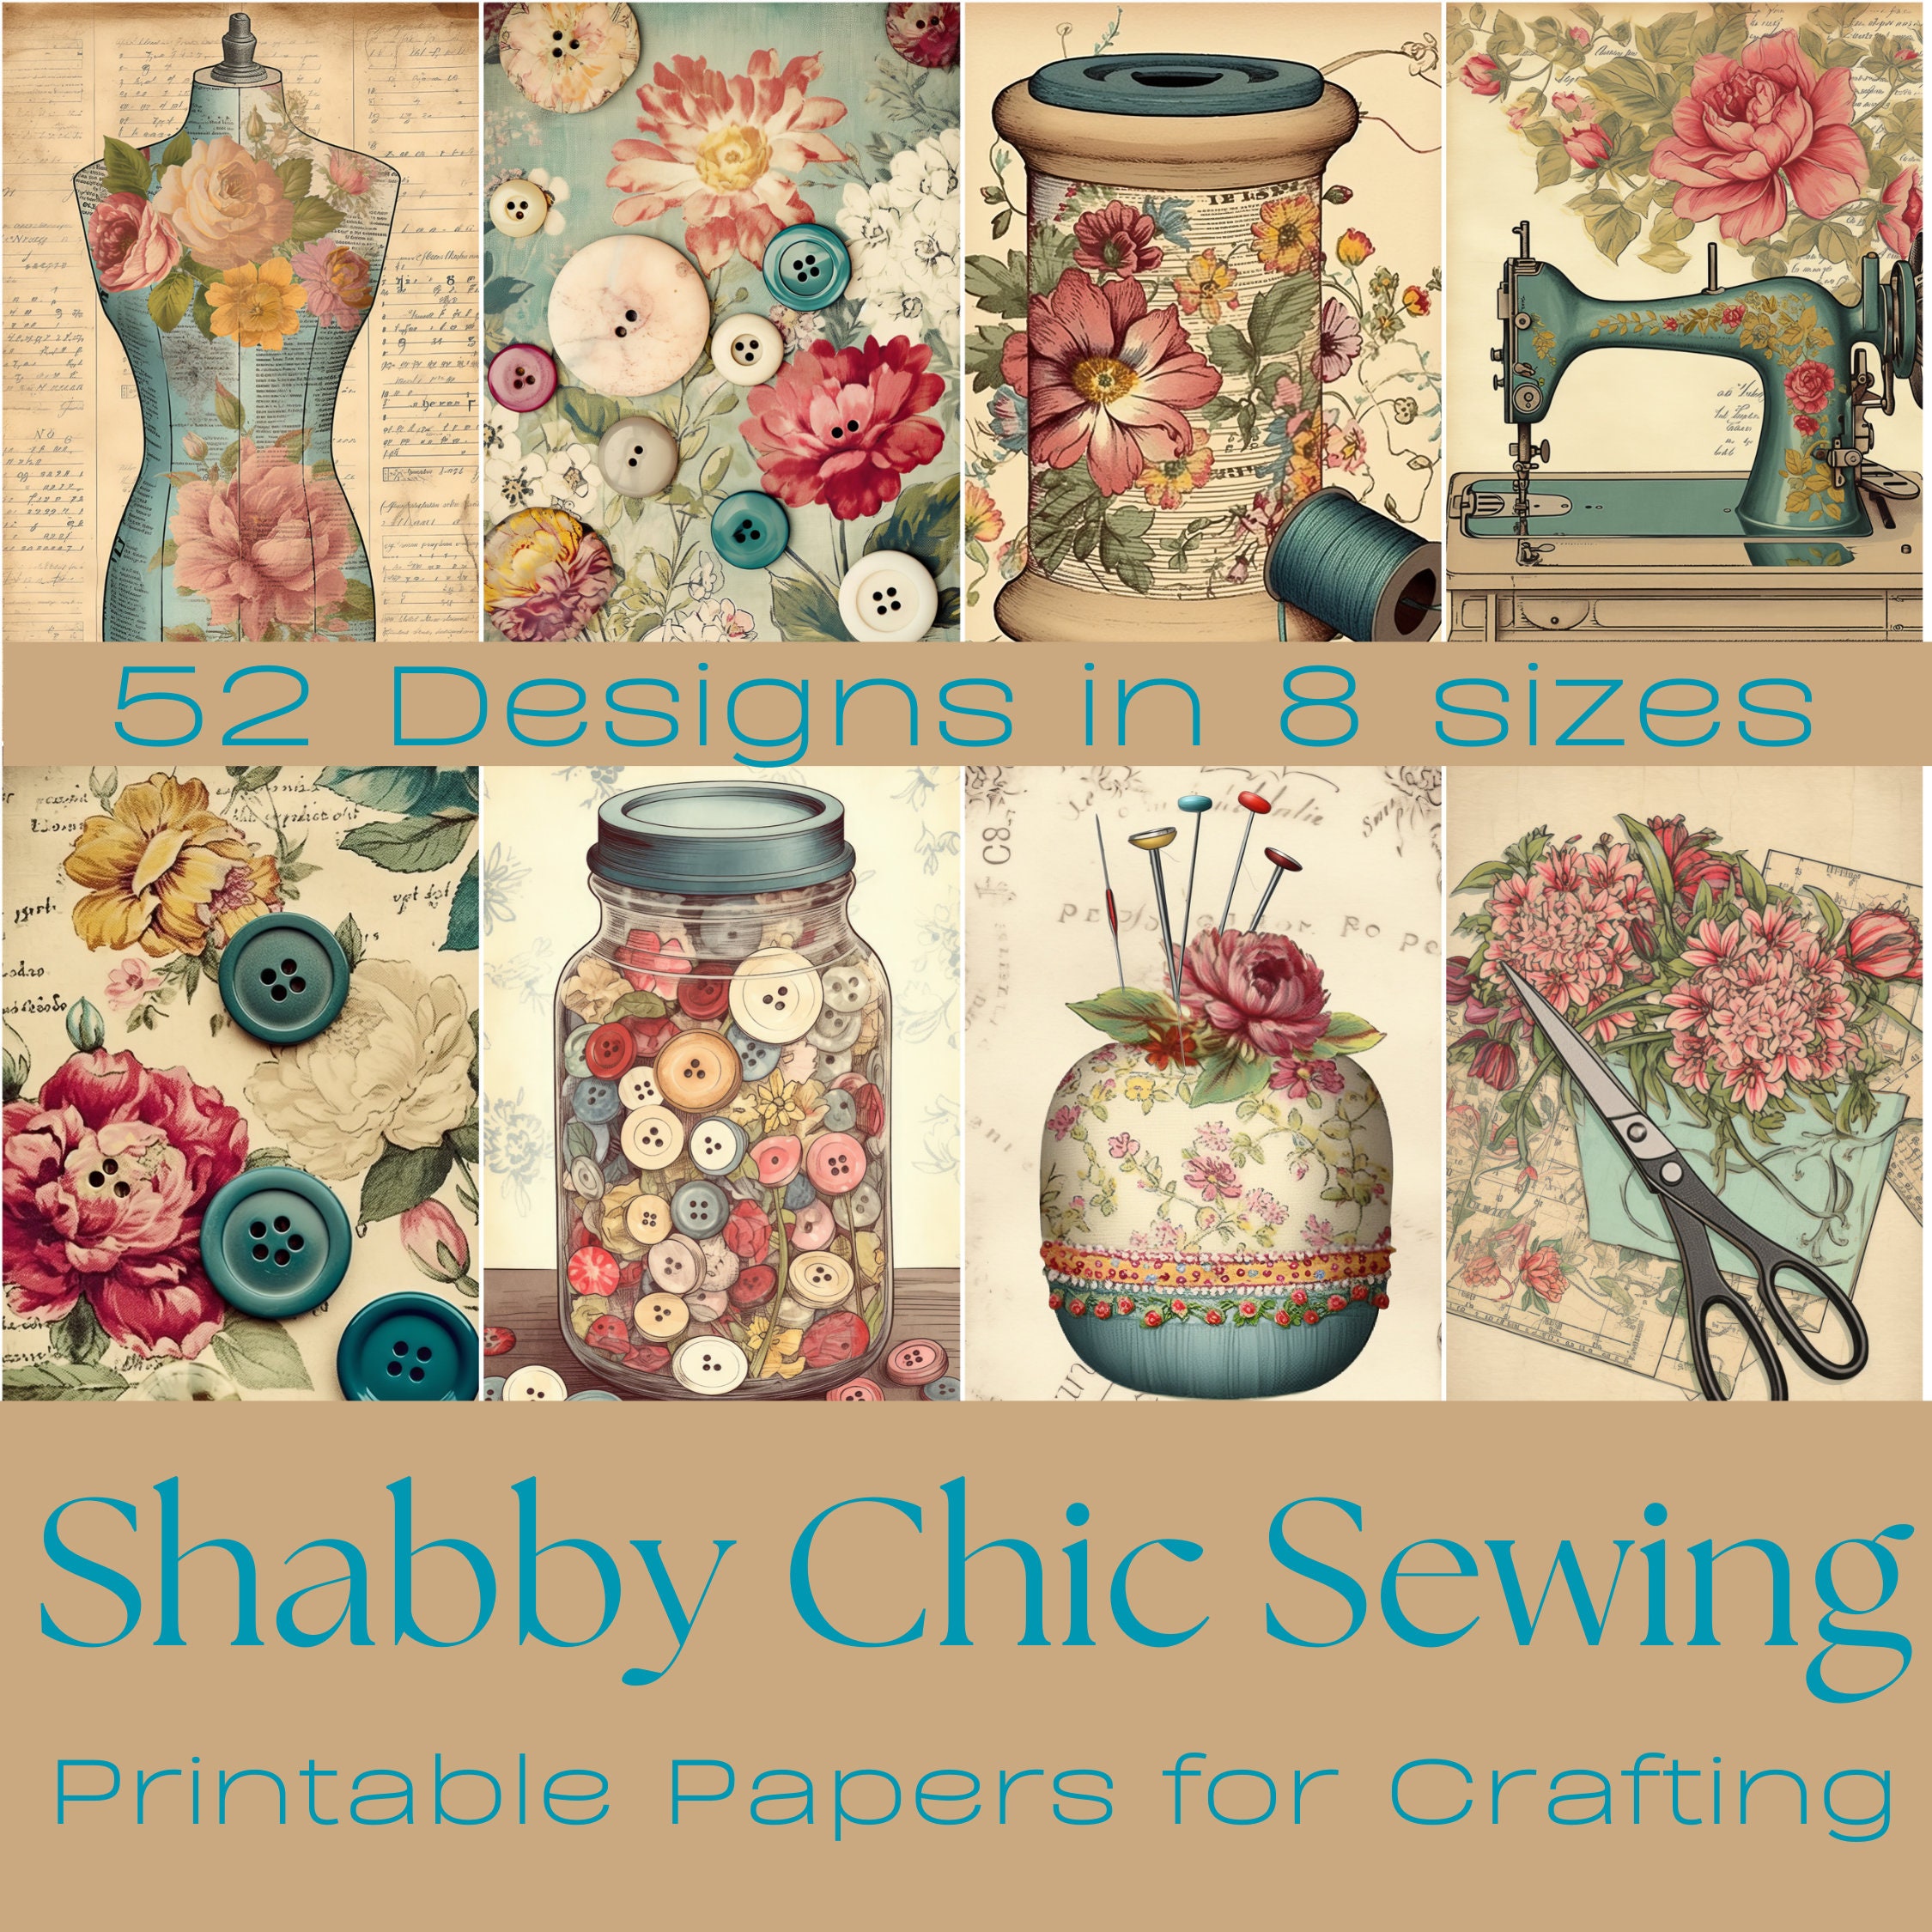 Sewing Pattern Paper Pack Pieces of Pattern Tissue & Instructions